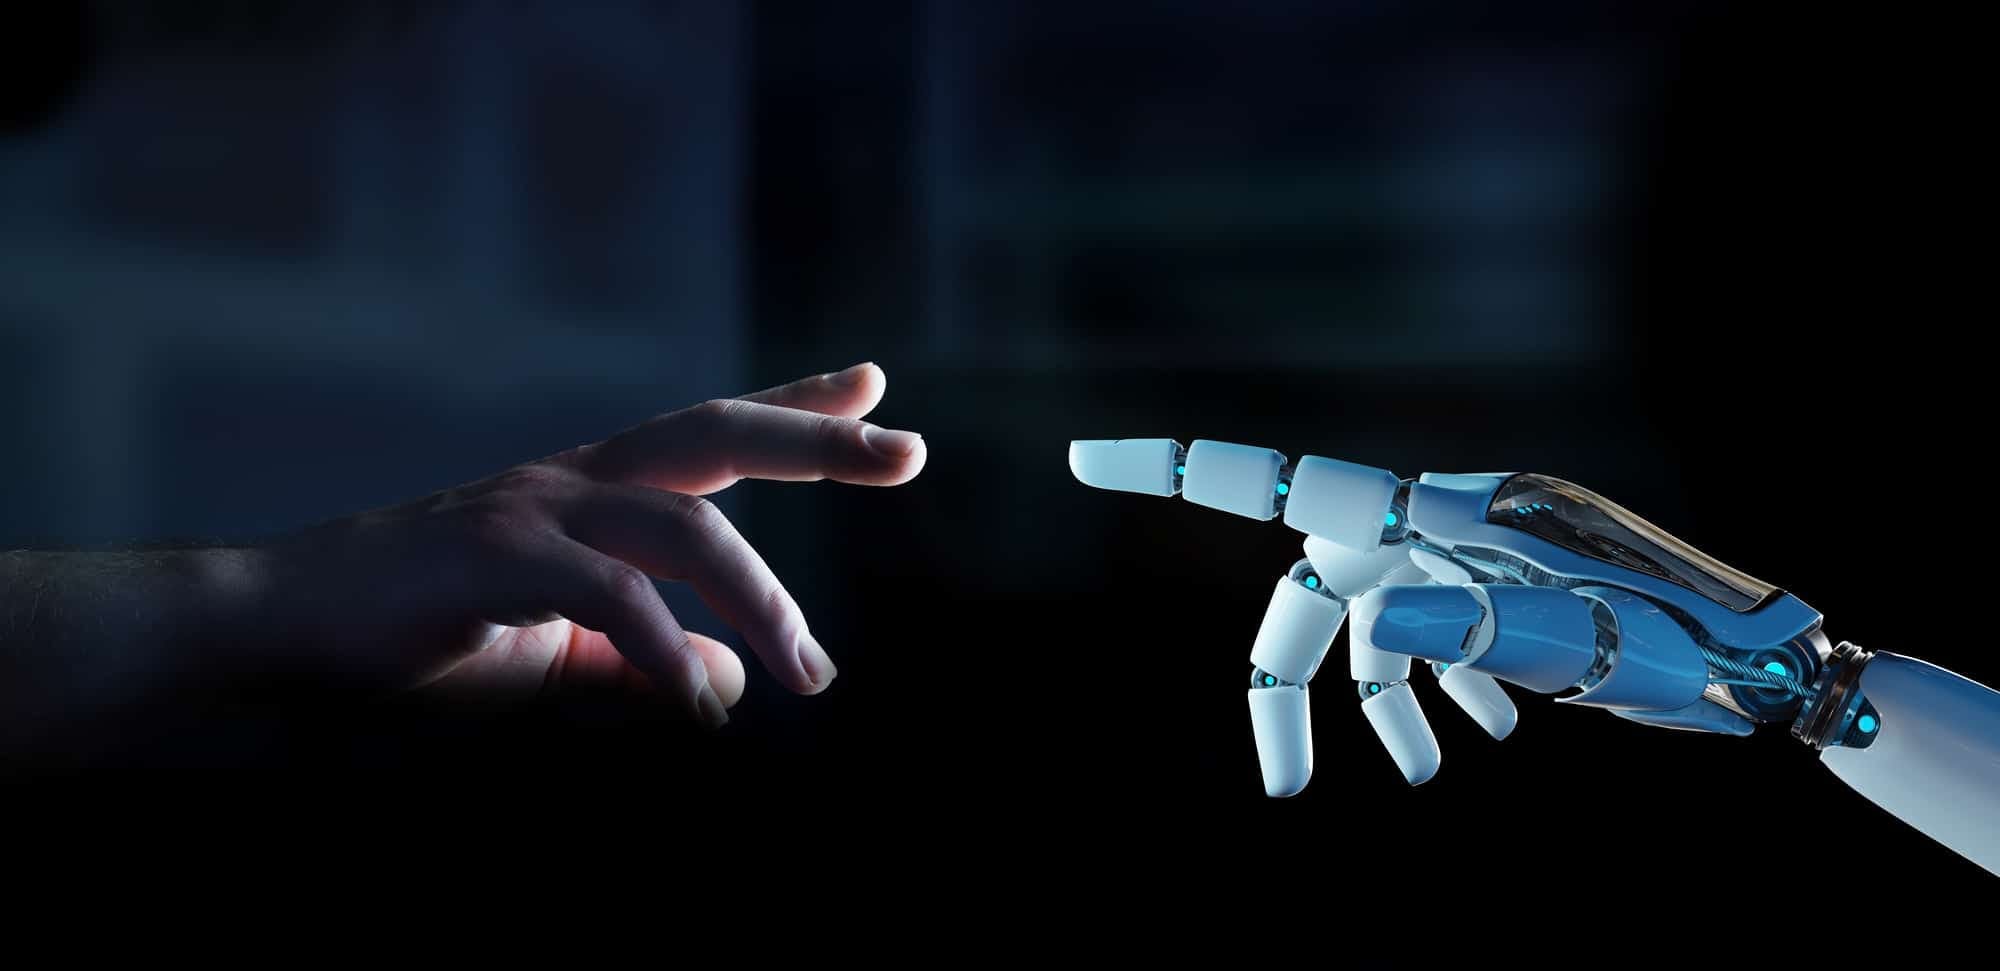 A human hand and a robotic hand extend towards each other, fingers almost touching, set against a dark background, evoking themes of human-technology connection.